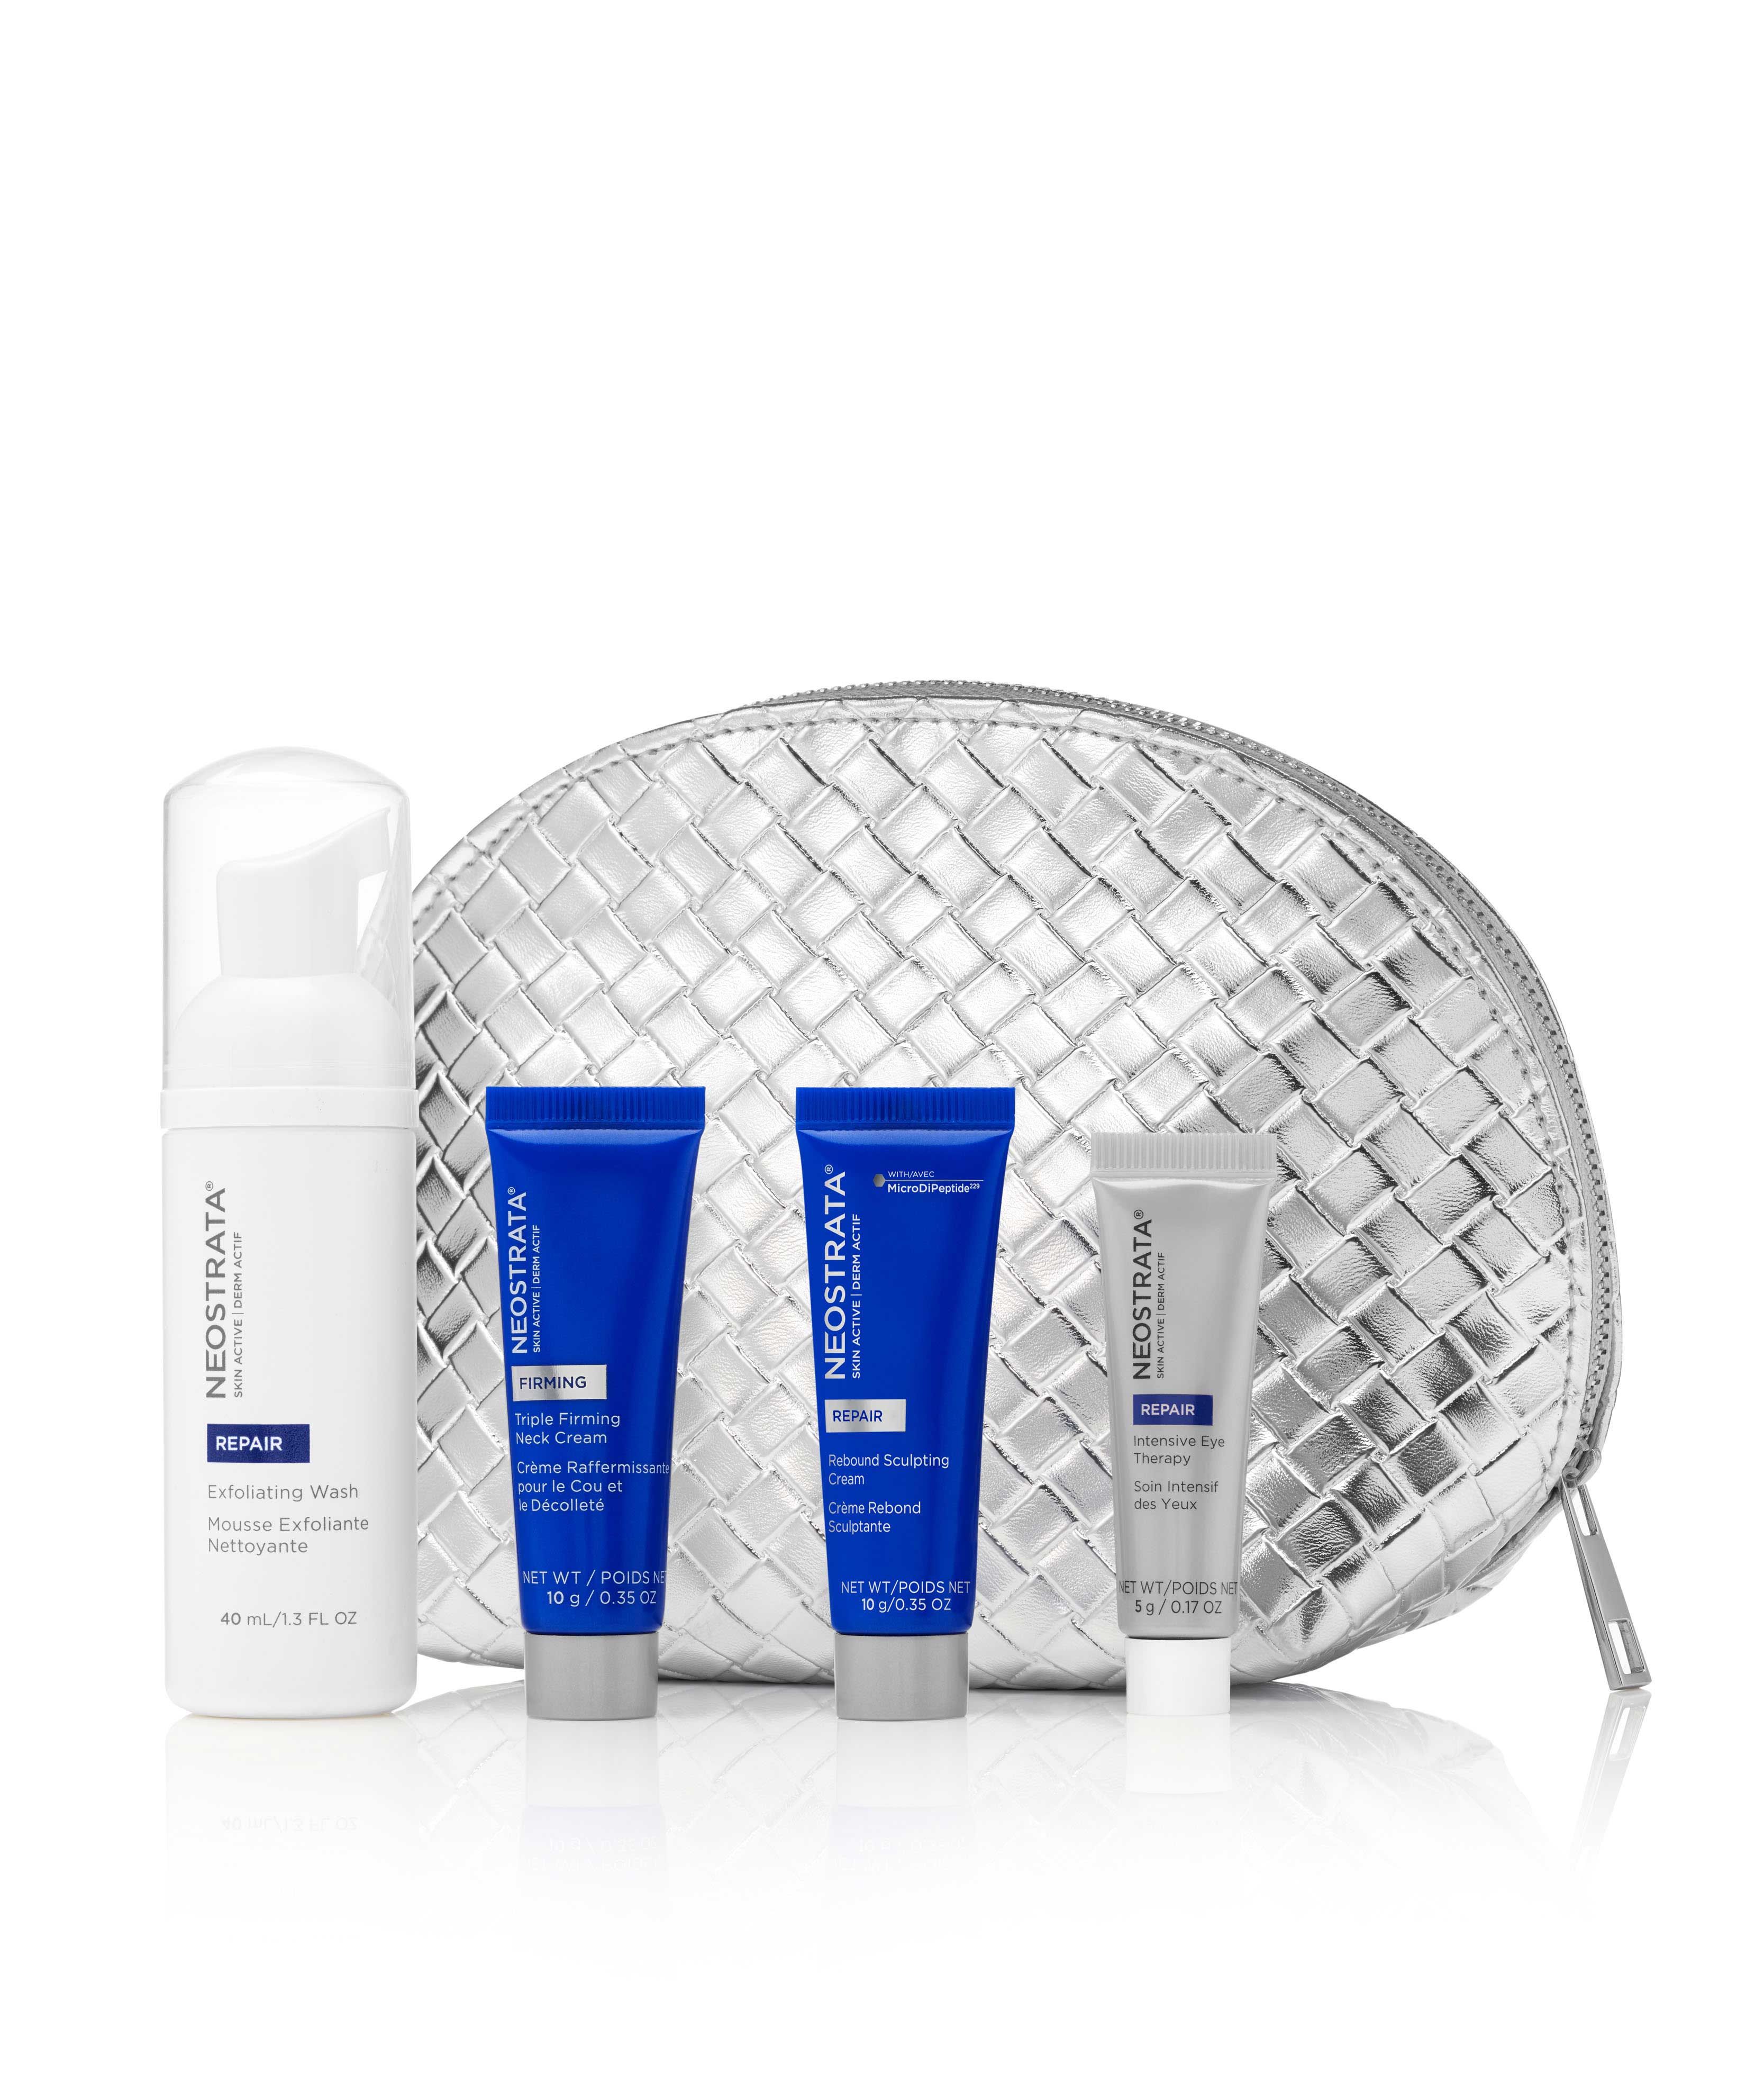 NeoStrata SKIN ACTIVE Starter Set | New To Neo? Jump Start Your Skincare Routine With An On-The-Go Kit Of 4 Essentials From The Skin Active Collection